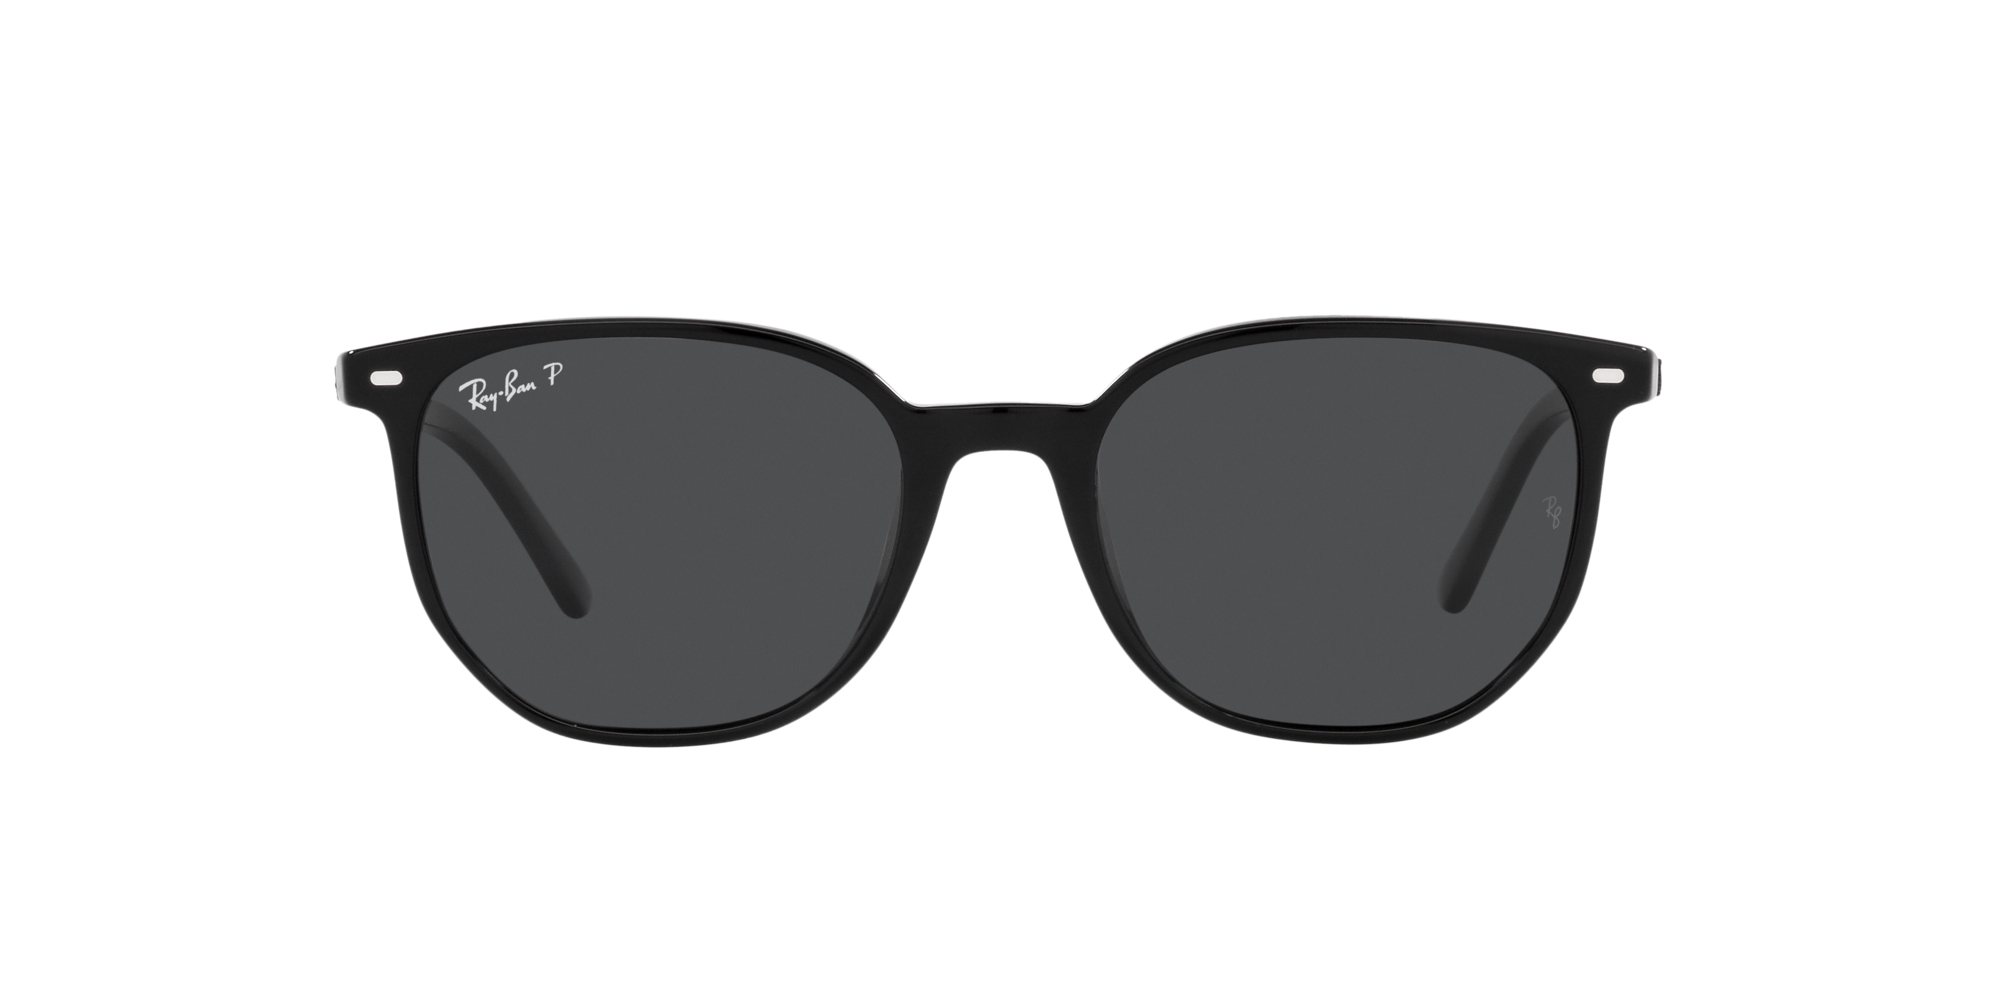 Gift RayBan Sunglasses For Men-8823-833 - Reflexions